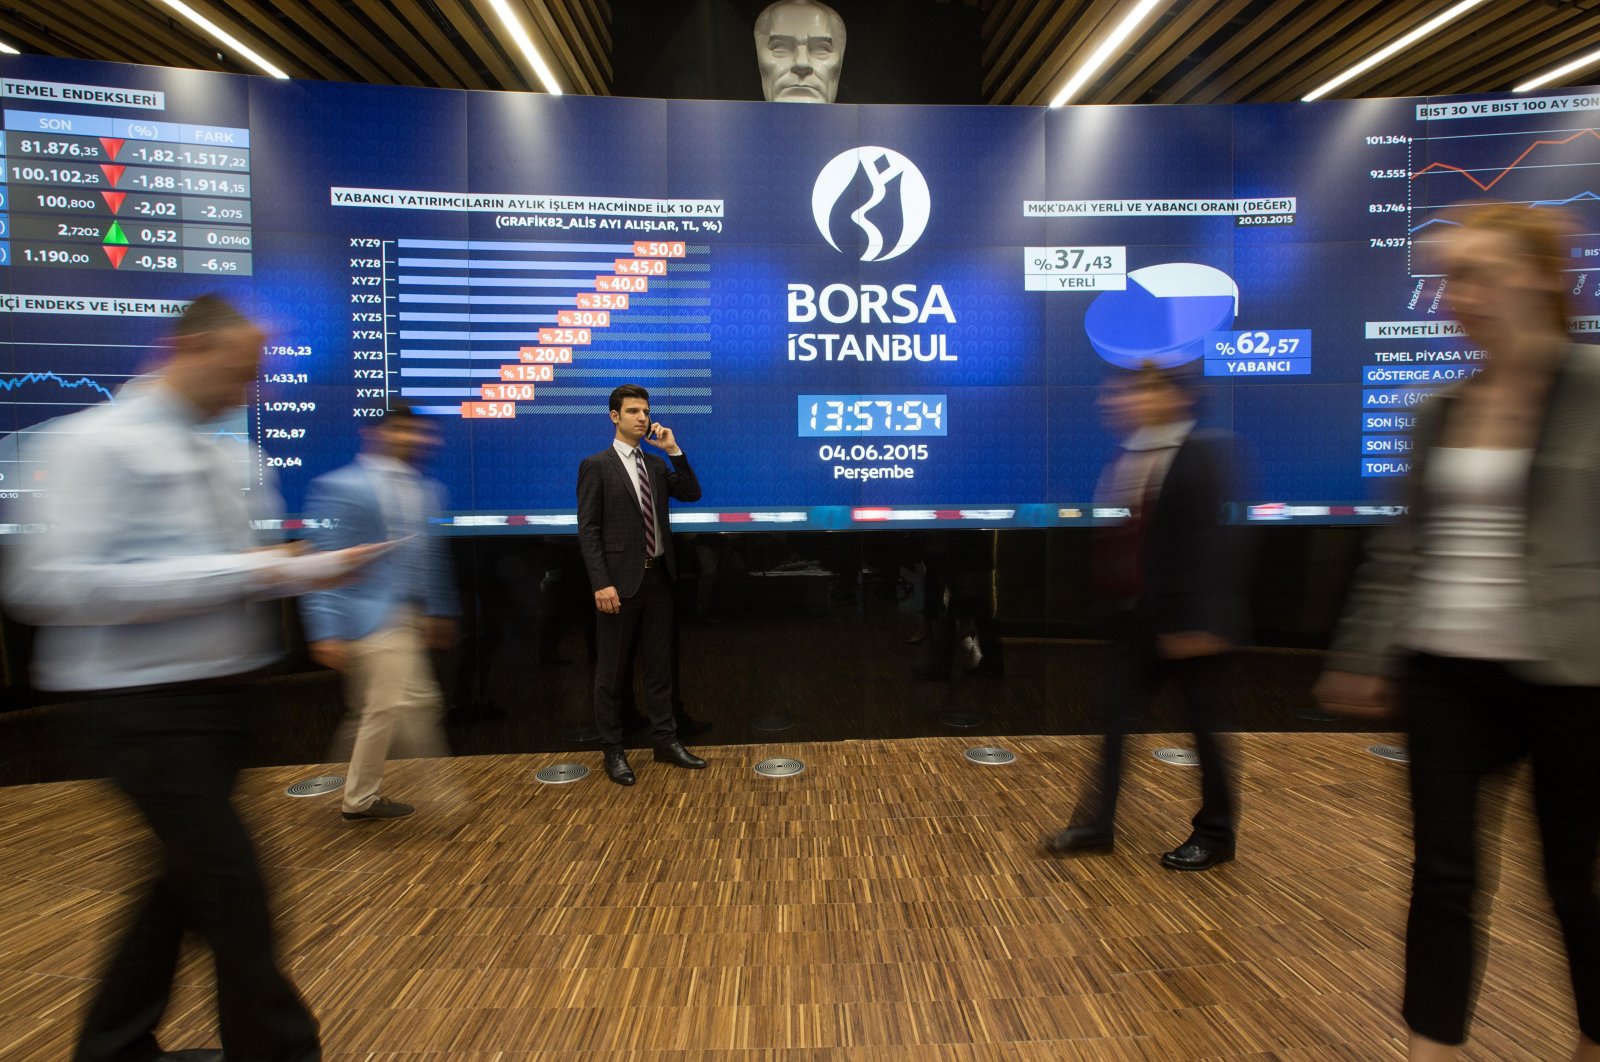 Turkish bourse soars after 5-day quake-related closure, govt measures